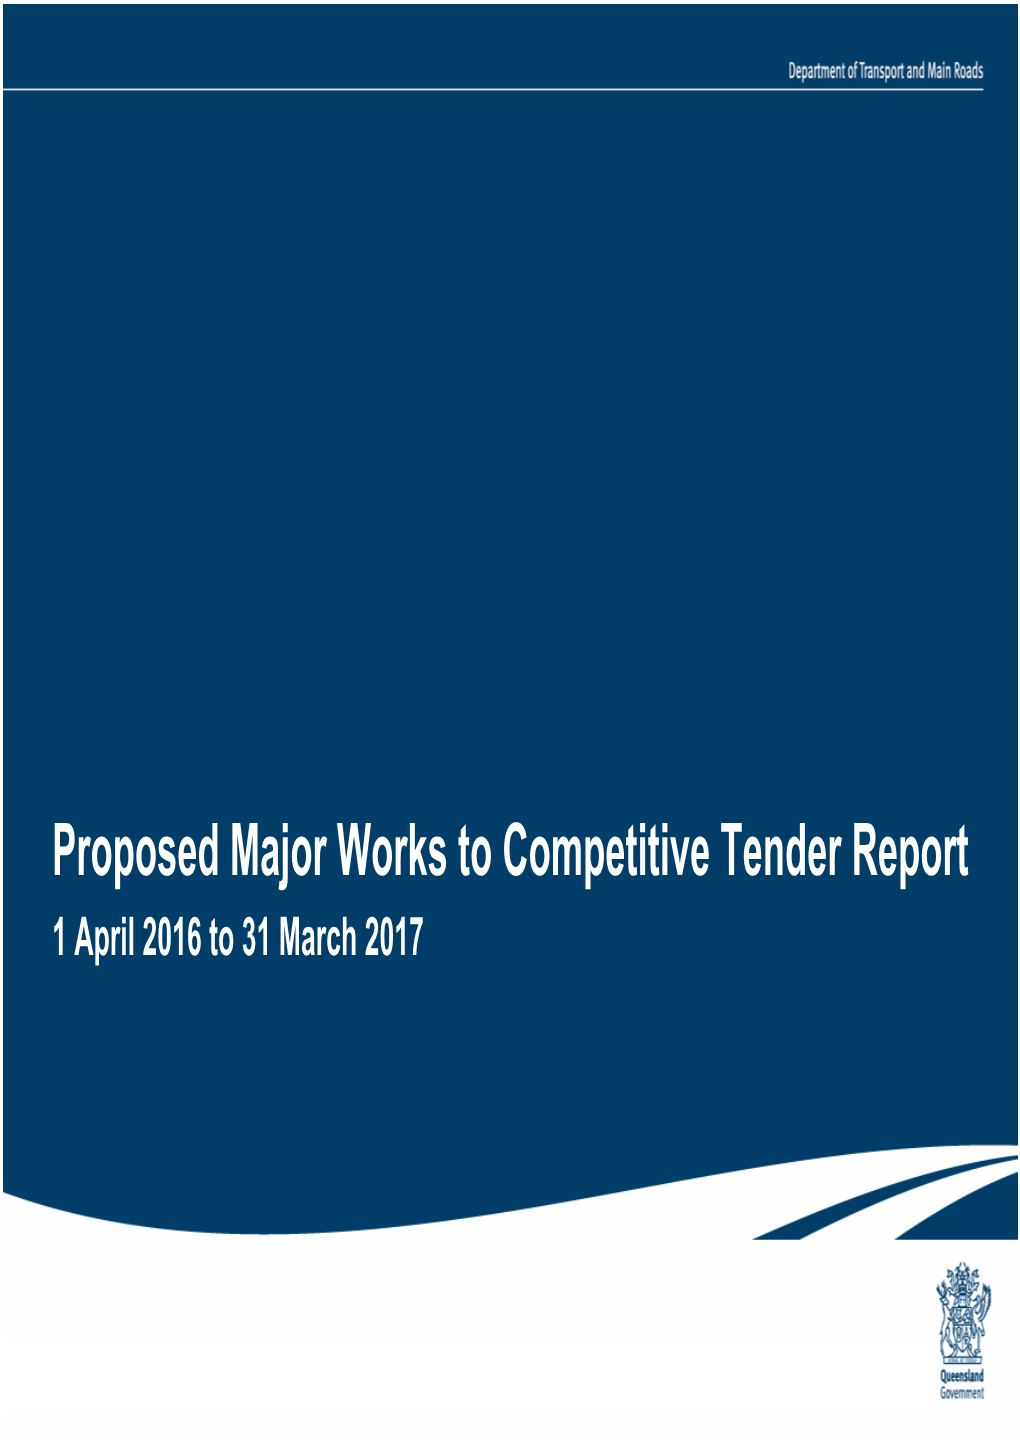 Proposed Major Works to Competitive Tender Report: 1 April 2016 to 31